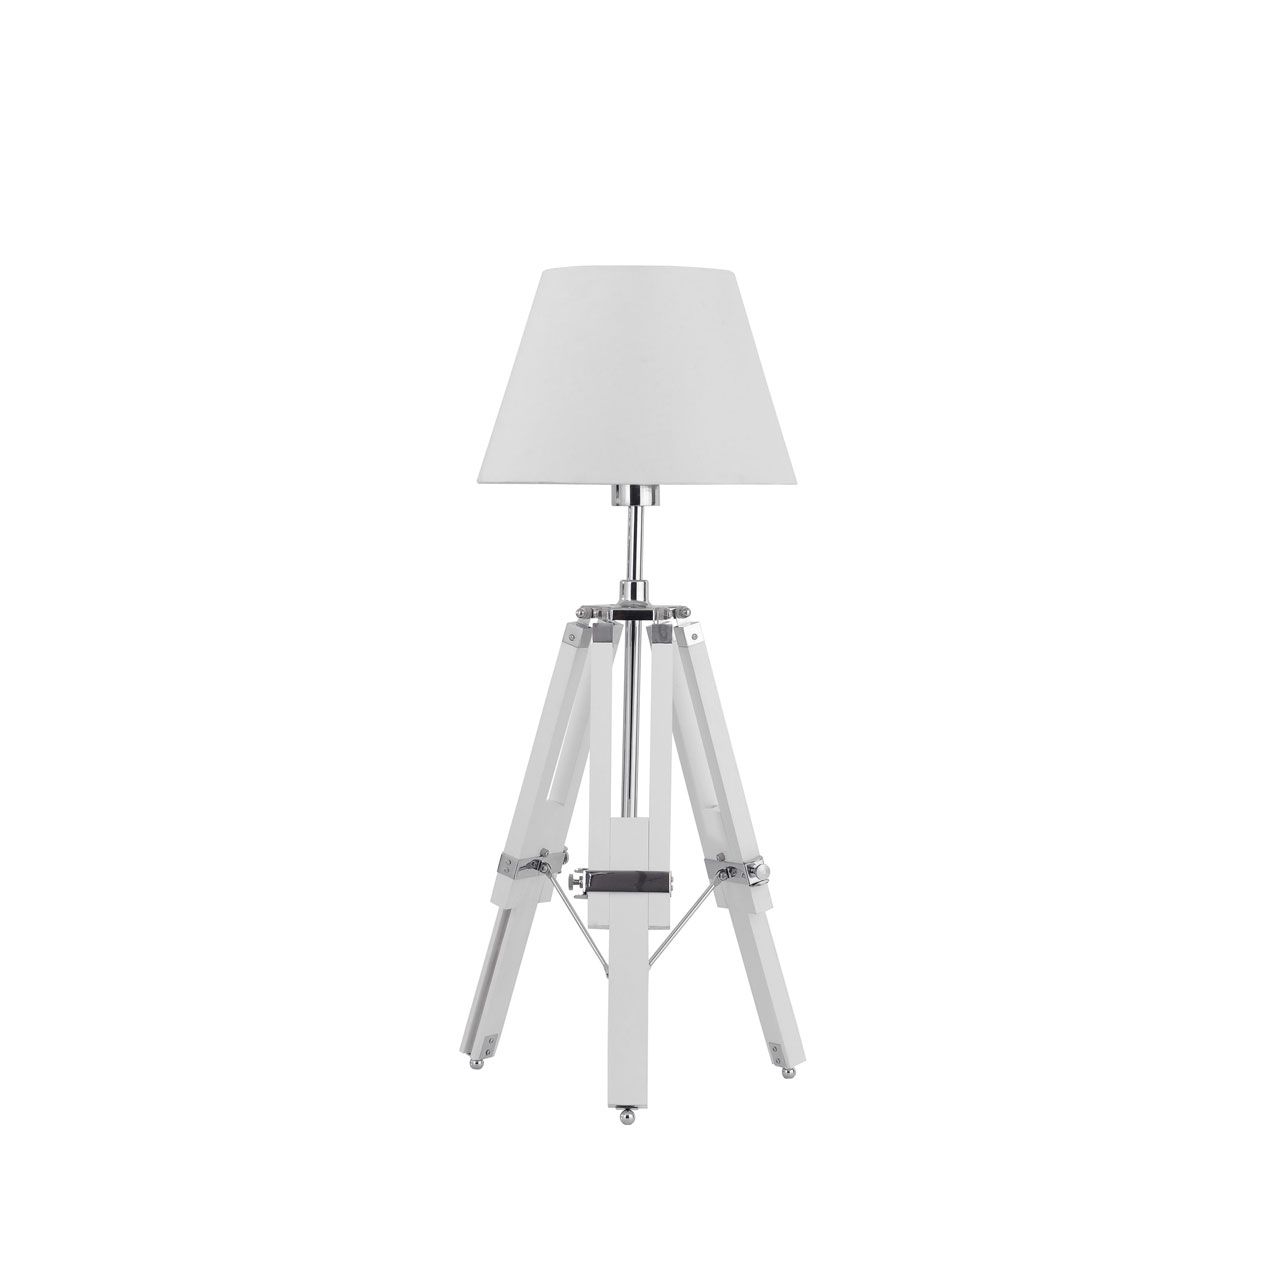 Jasper White Fabric Shade Table Lamp With Tripod Wooden Base